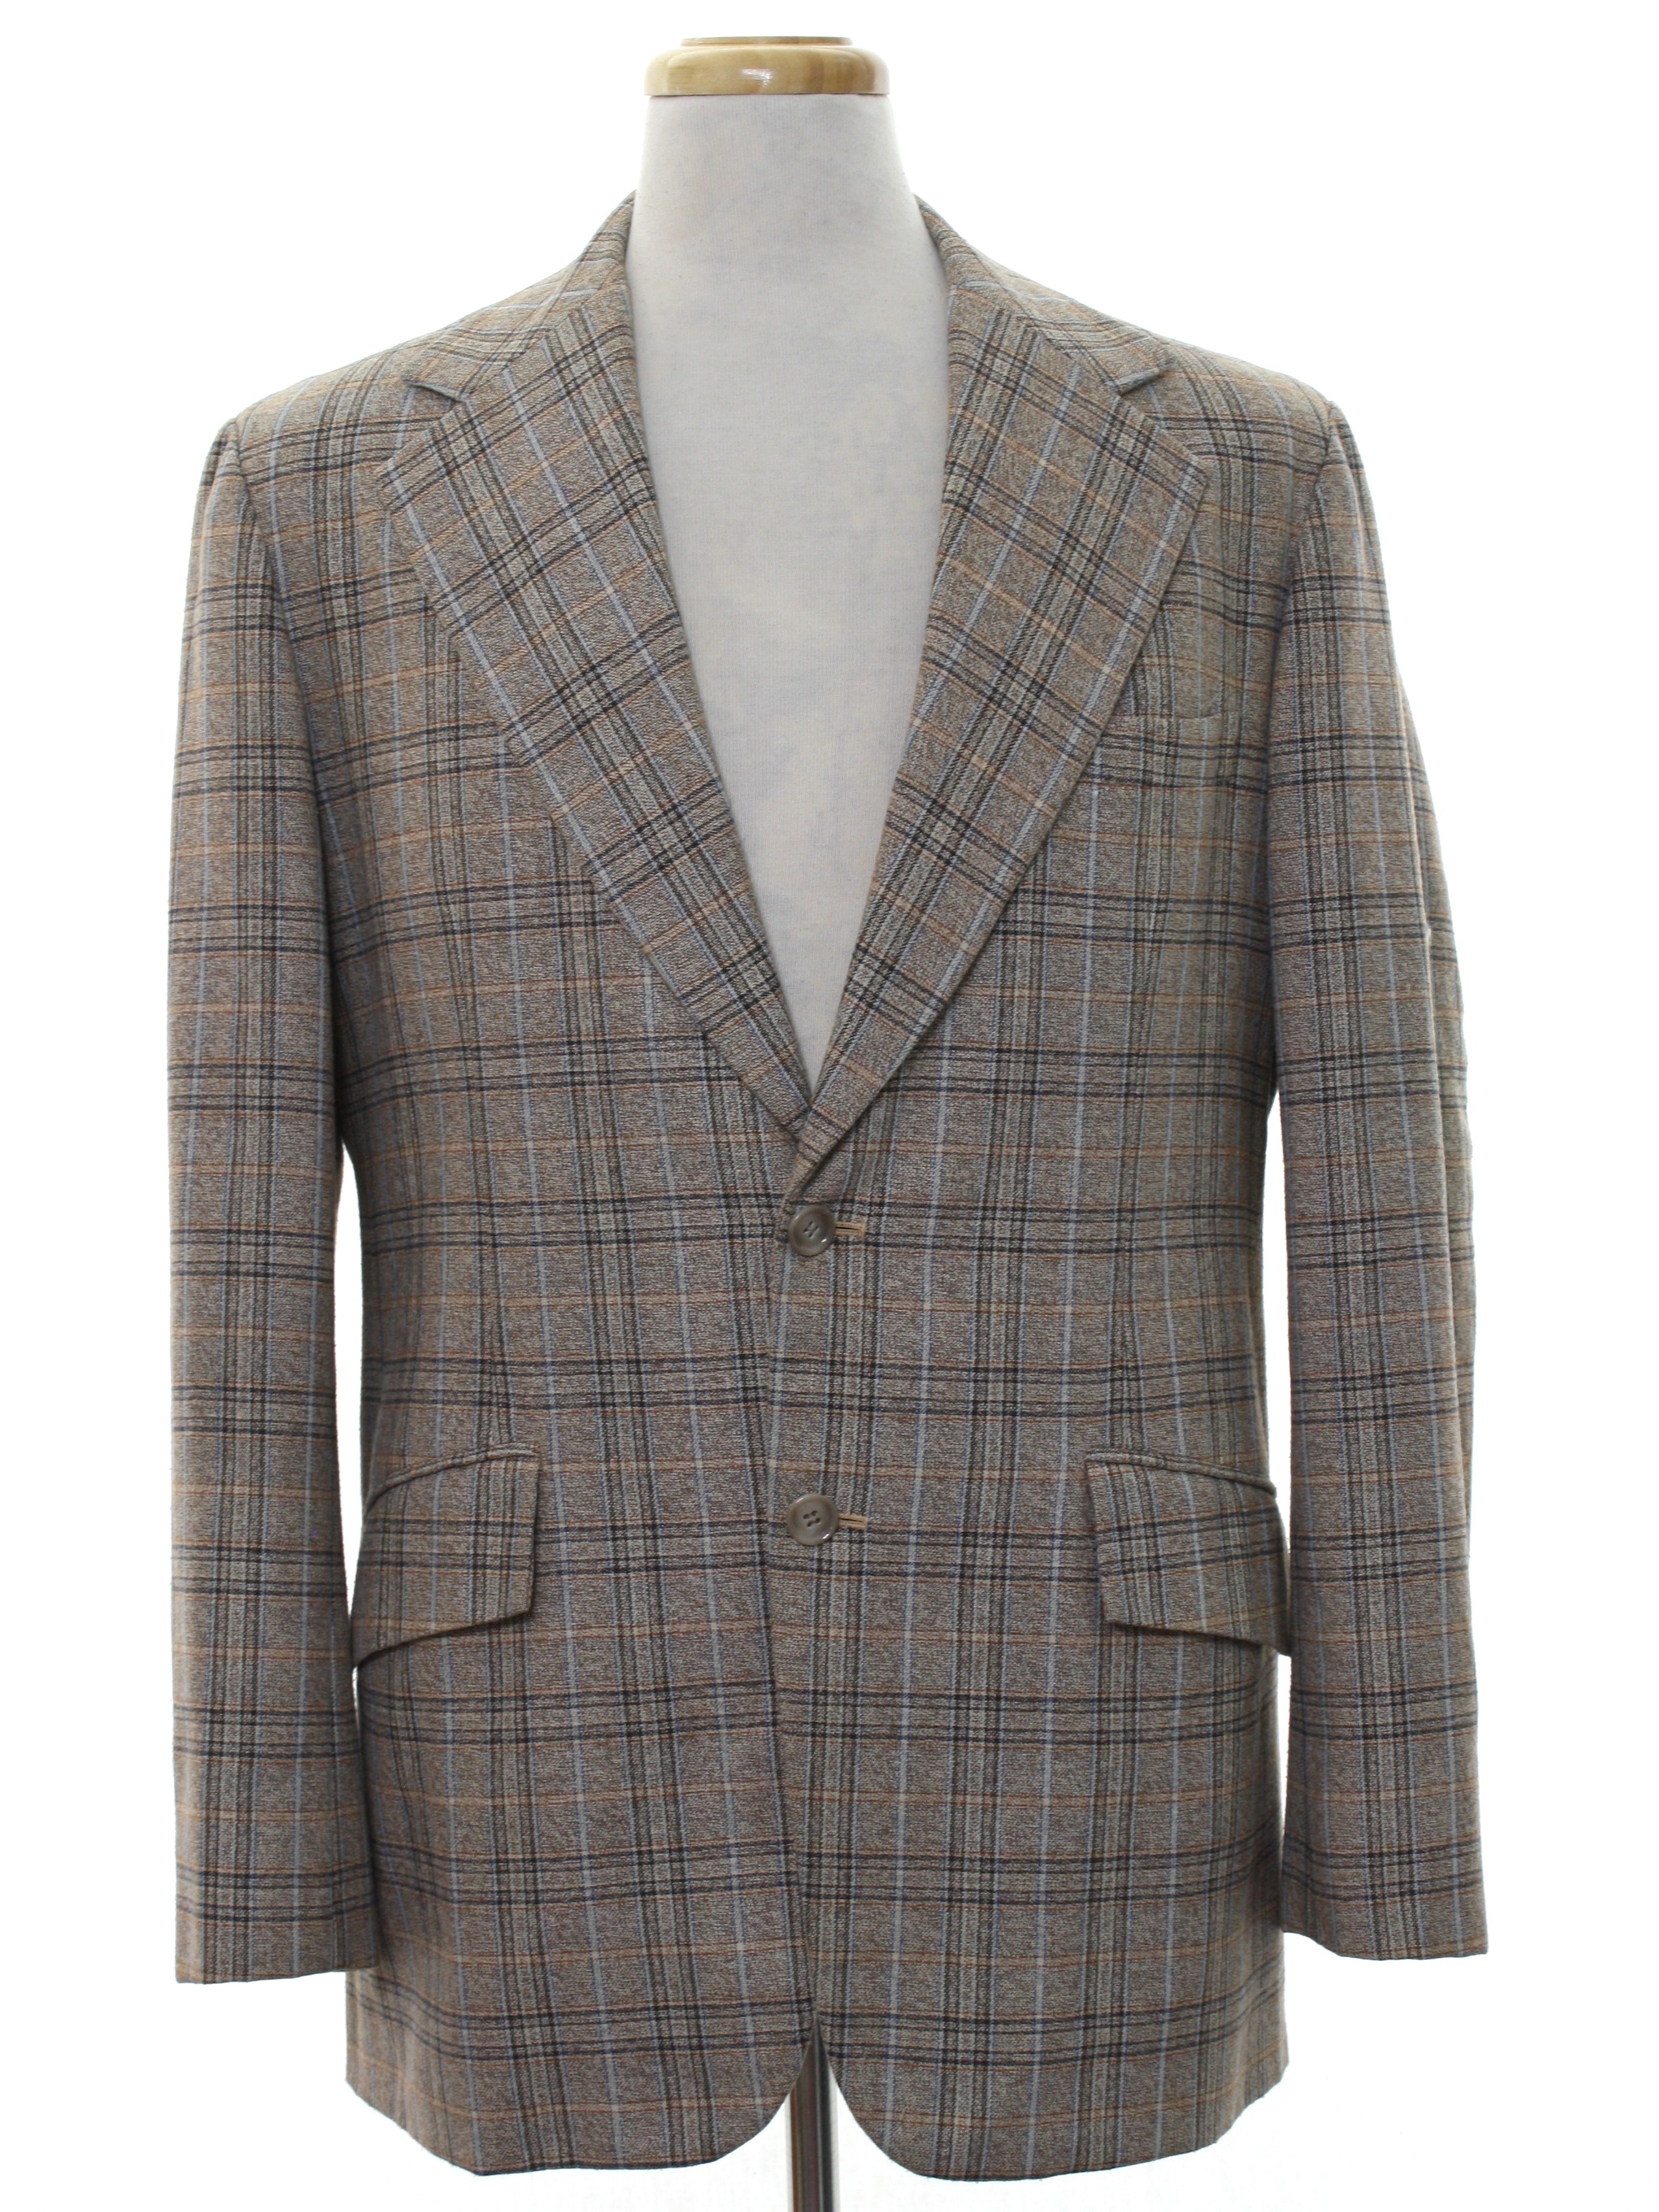 Seventies Ross by Wellworth in Kowloon Hong Kong Jacket: 70s -Ross by ...